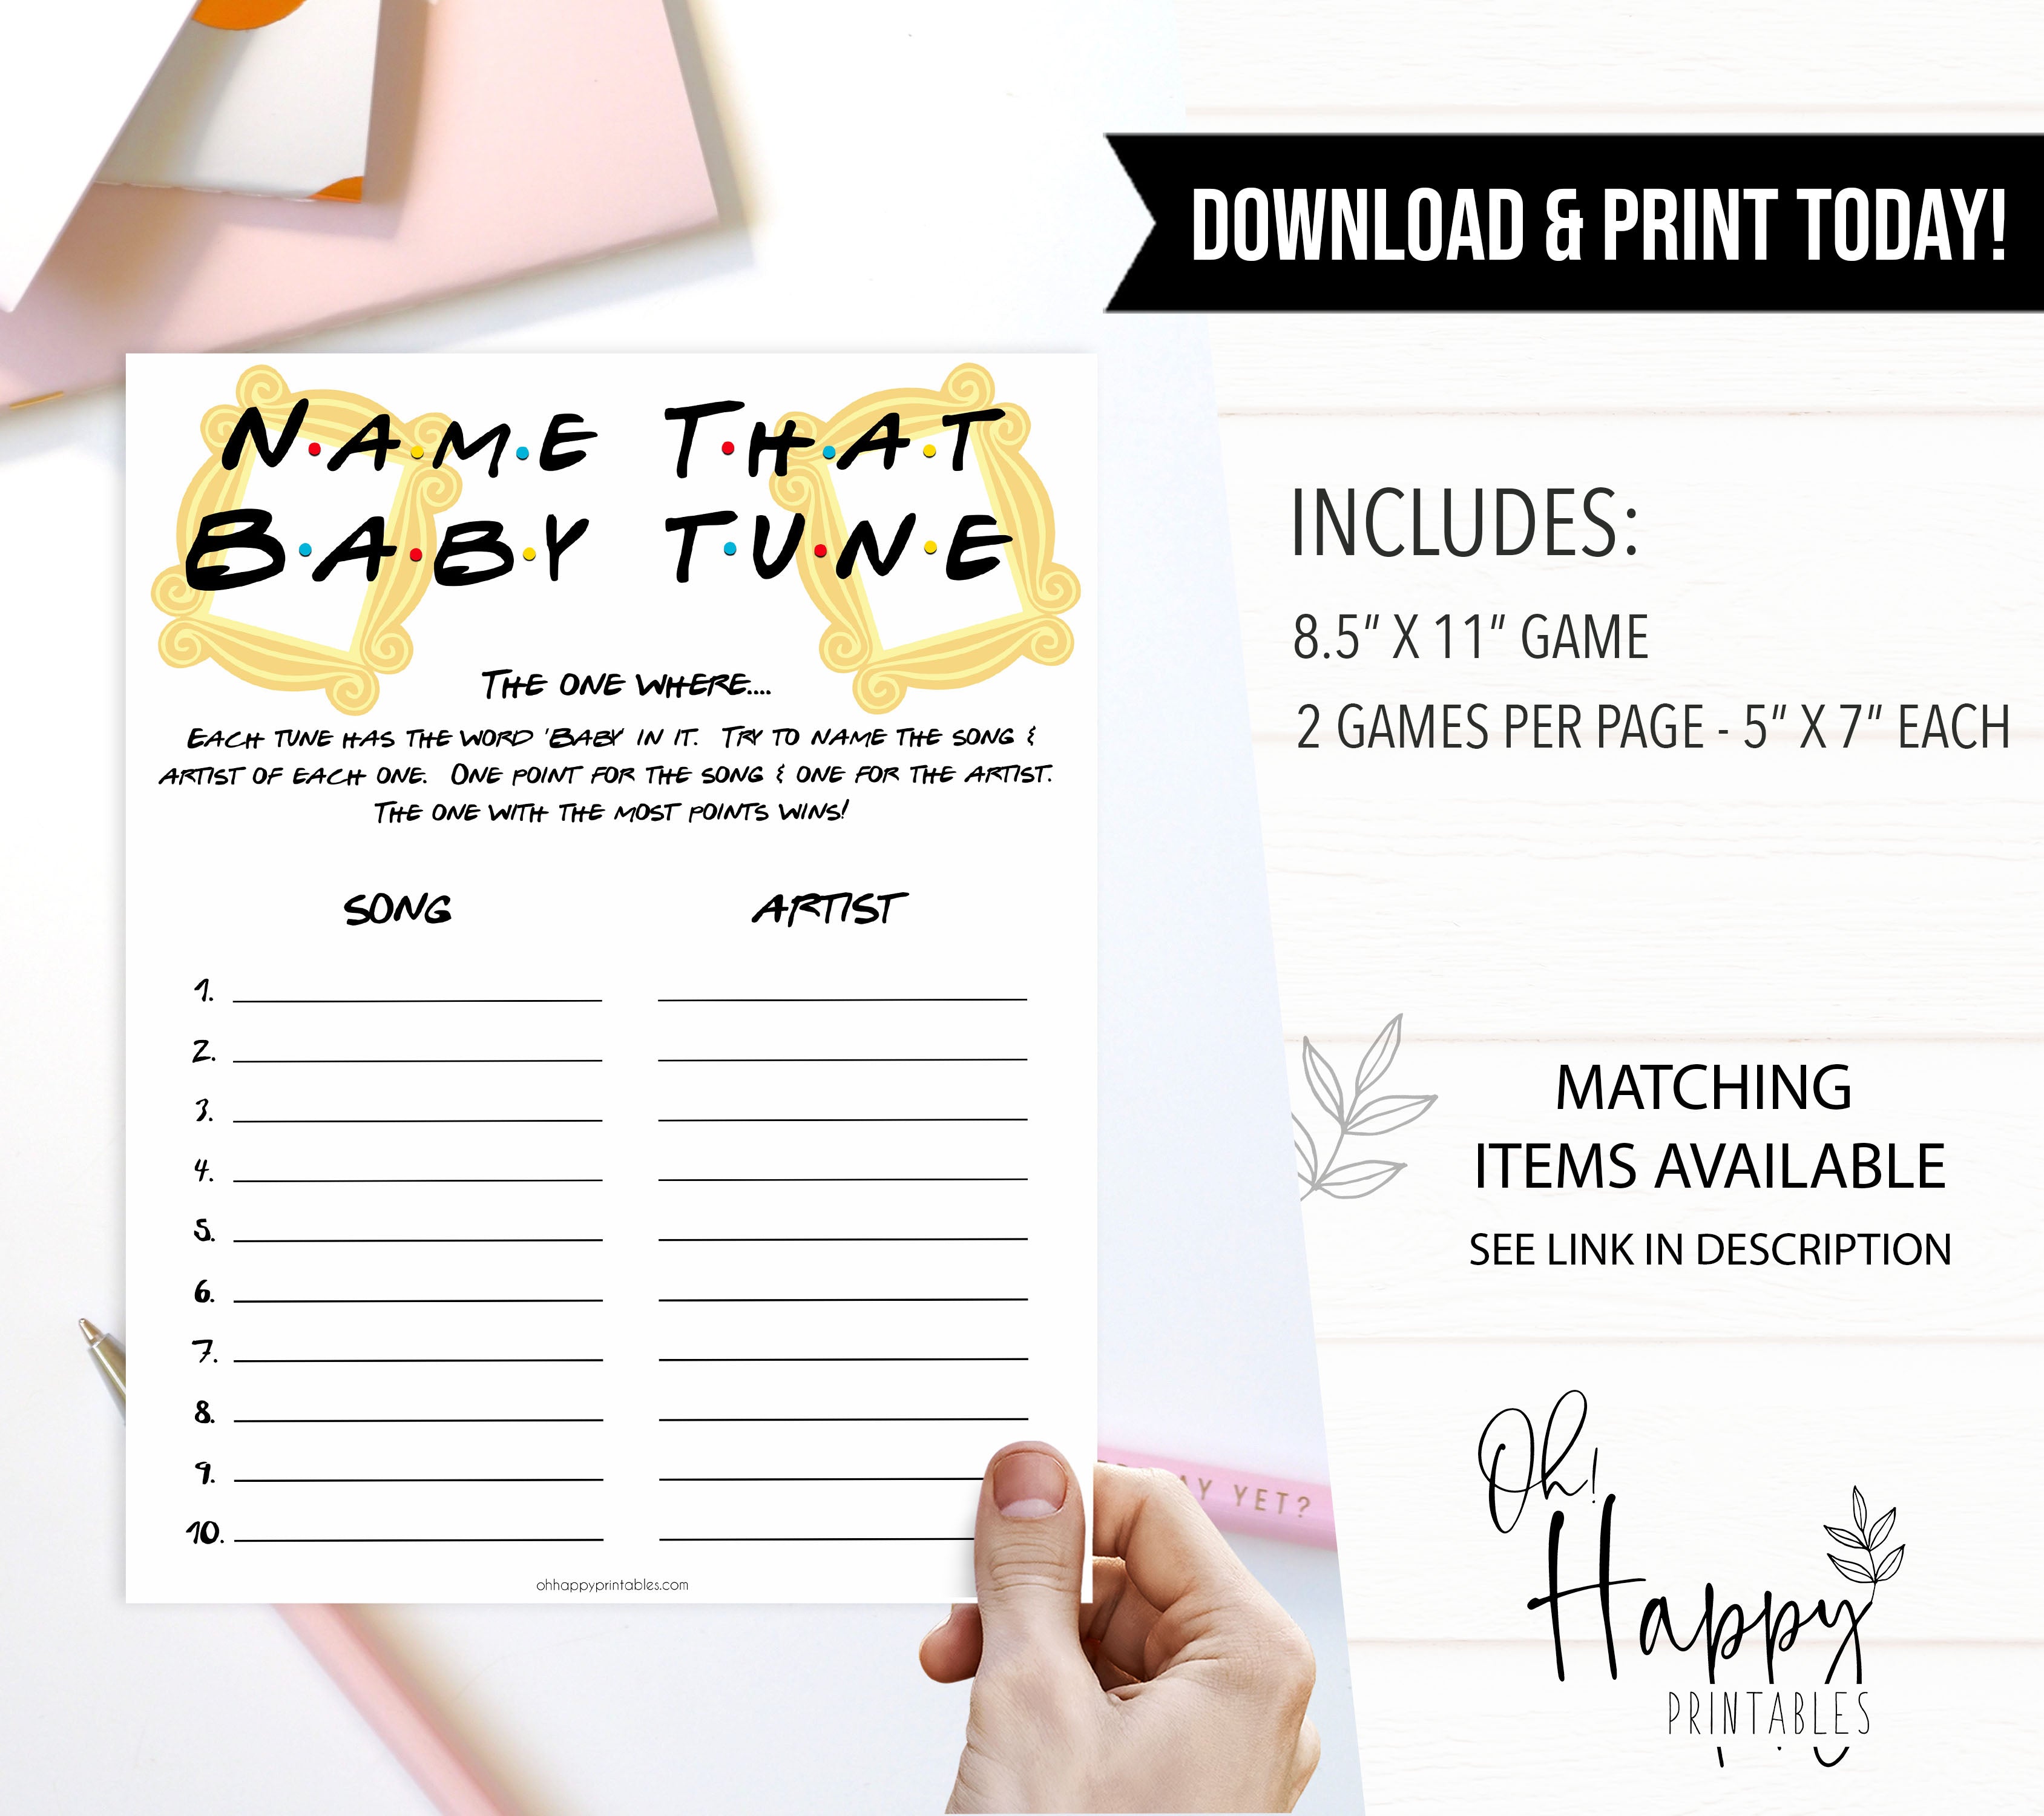 name that baby tune, Printable baby shower games, friends fun baby games, baby shower games, fun baby shower ideas, top baby shower ideas, friends baby shower, friends baby shower ideas